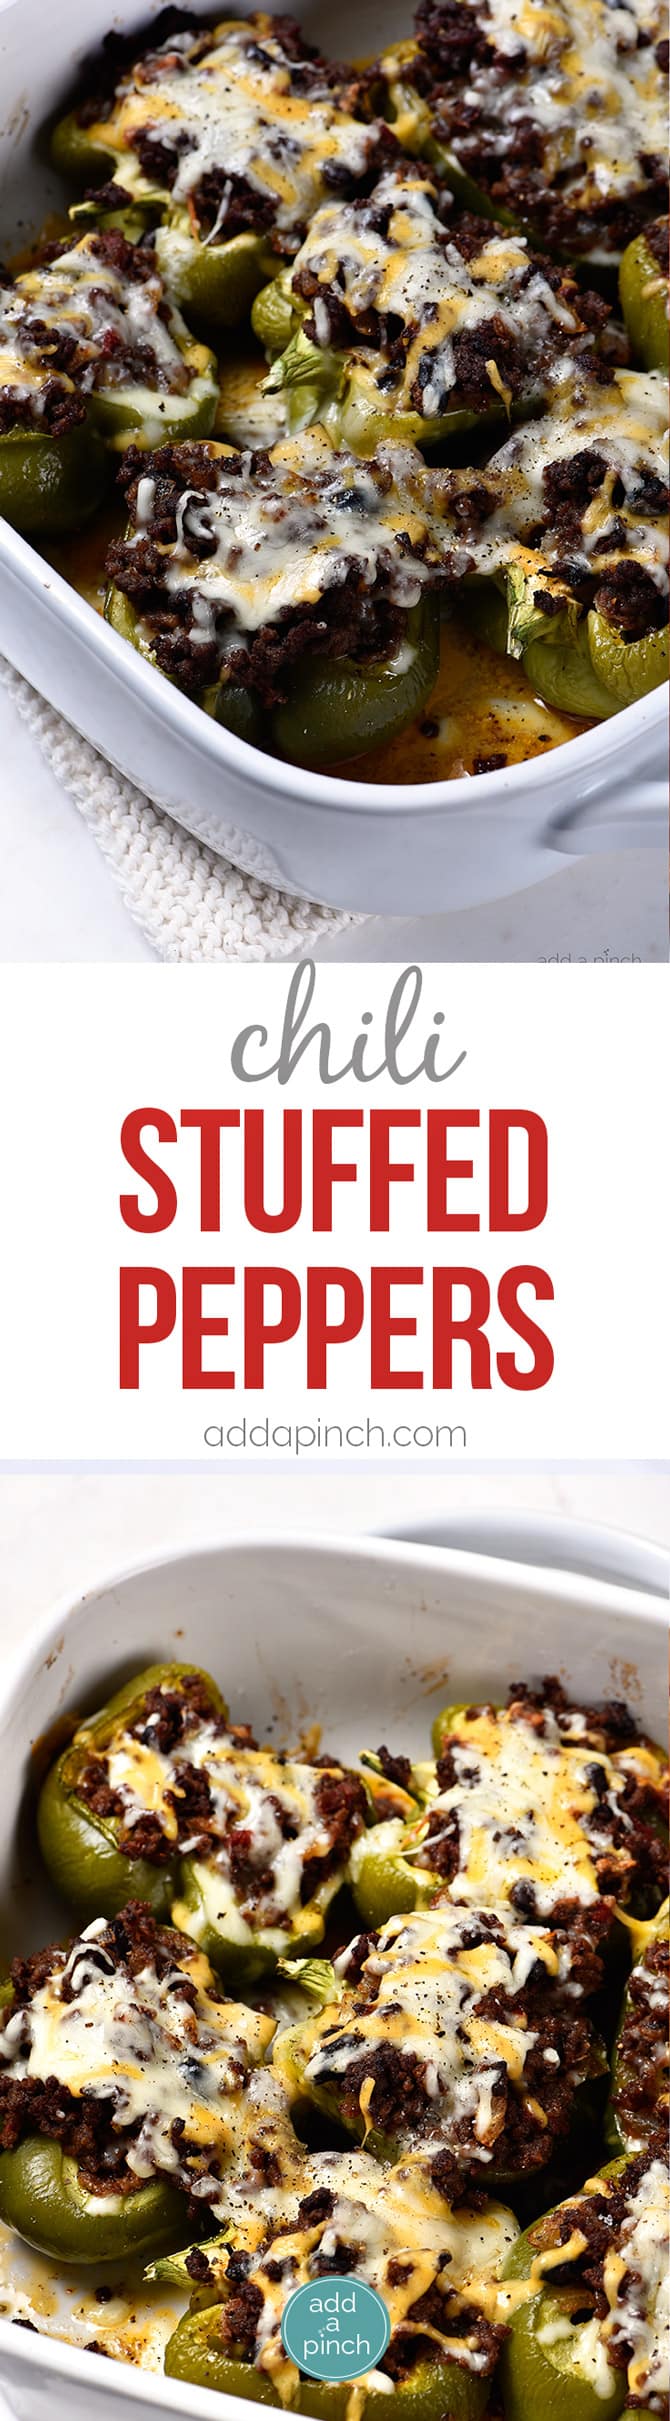 Chili Stuffed Peppers make an easy and delicious meal! This recipe includes great make-ahead and freezer-friendly tips to make this dish even easier for busy weeknights! // addapinch.com